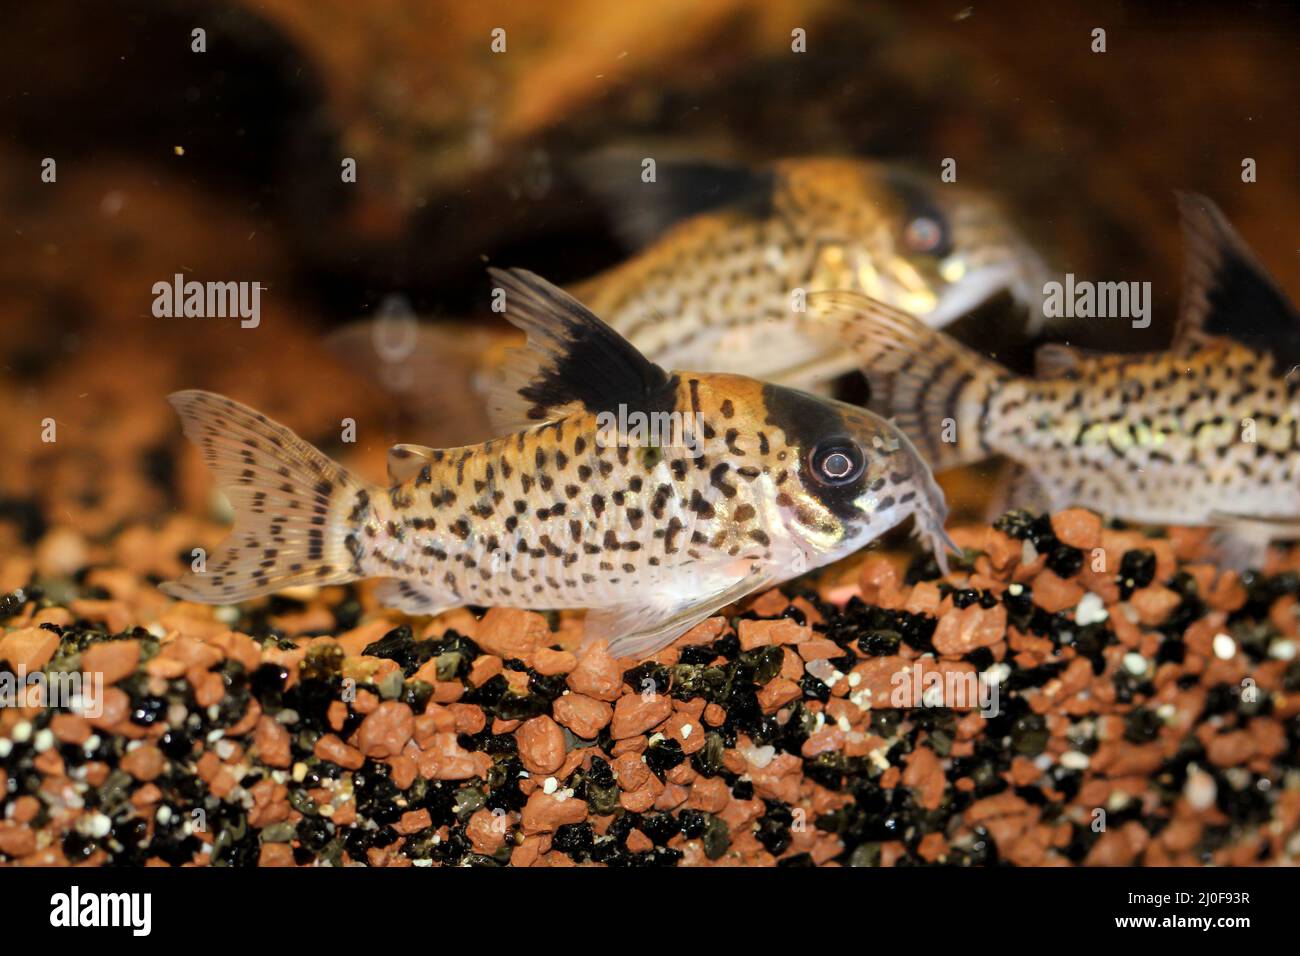 Image of several armored catfish in an aquarium Stock Photo